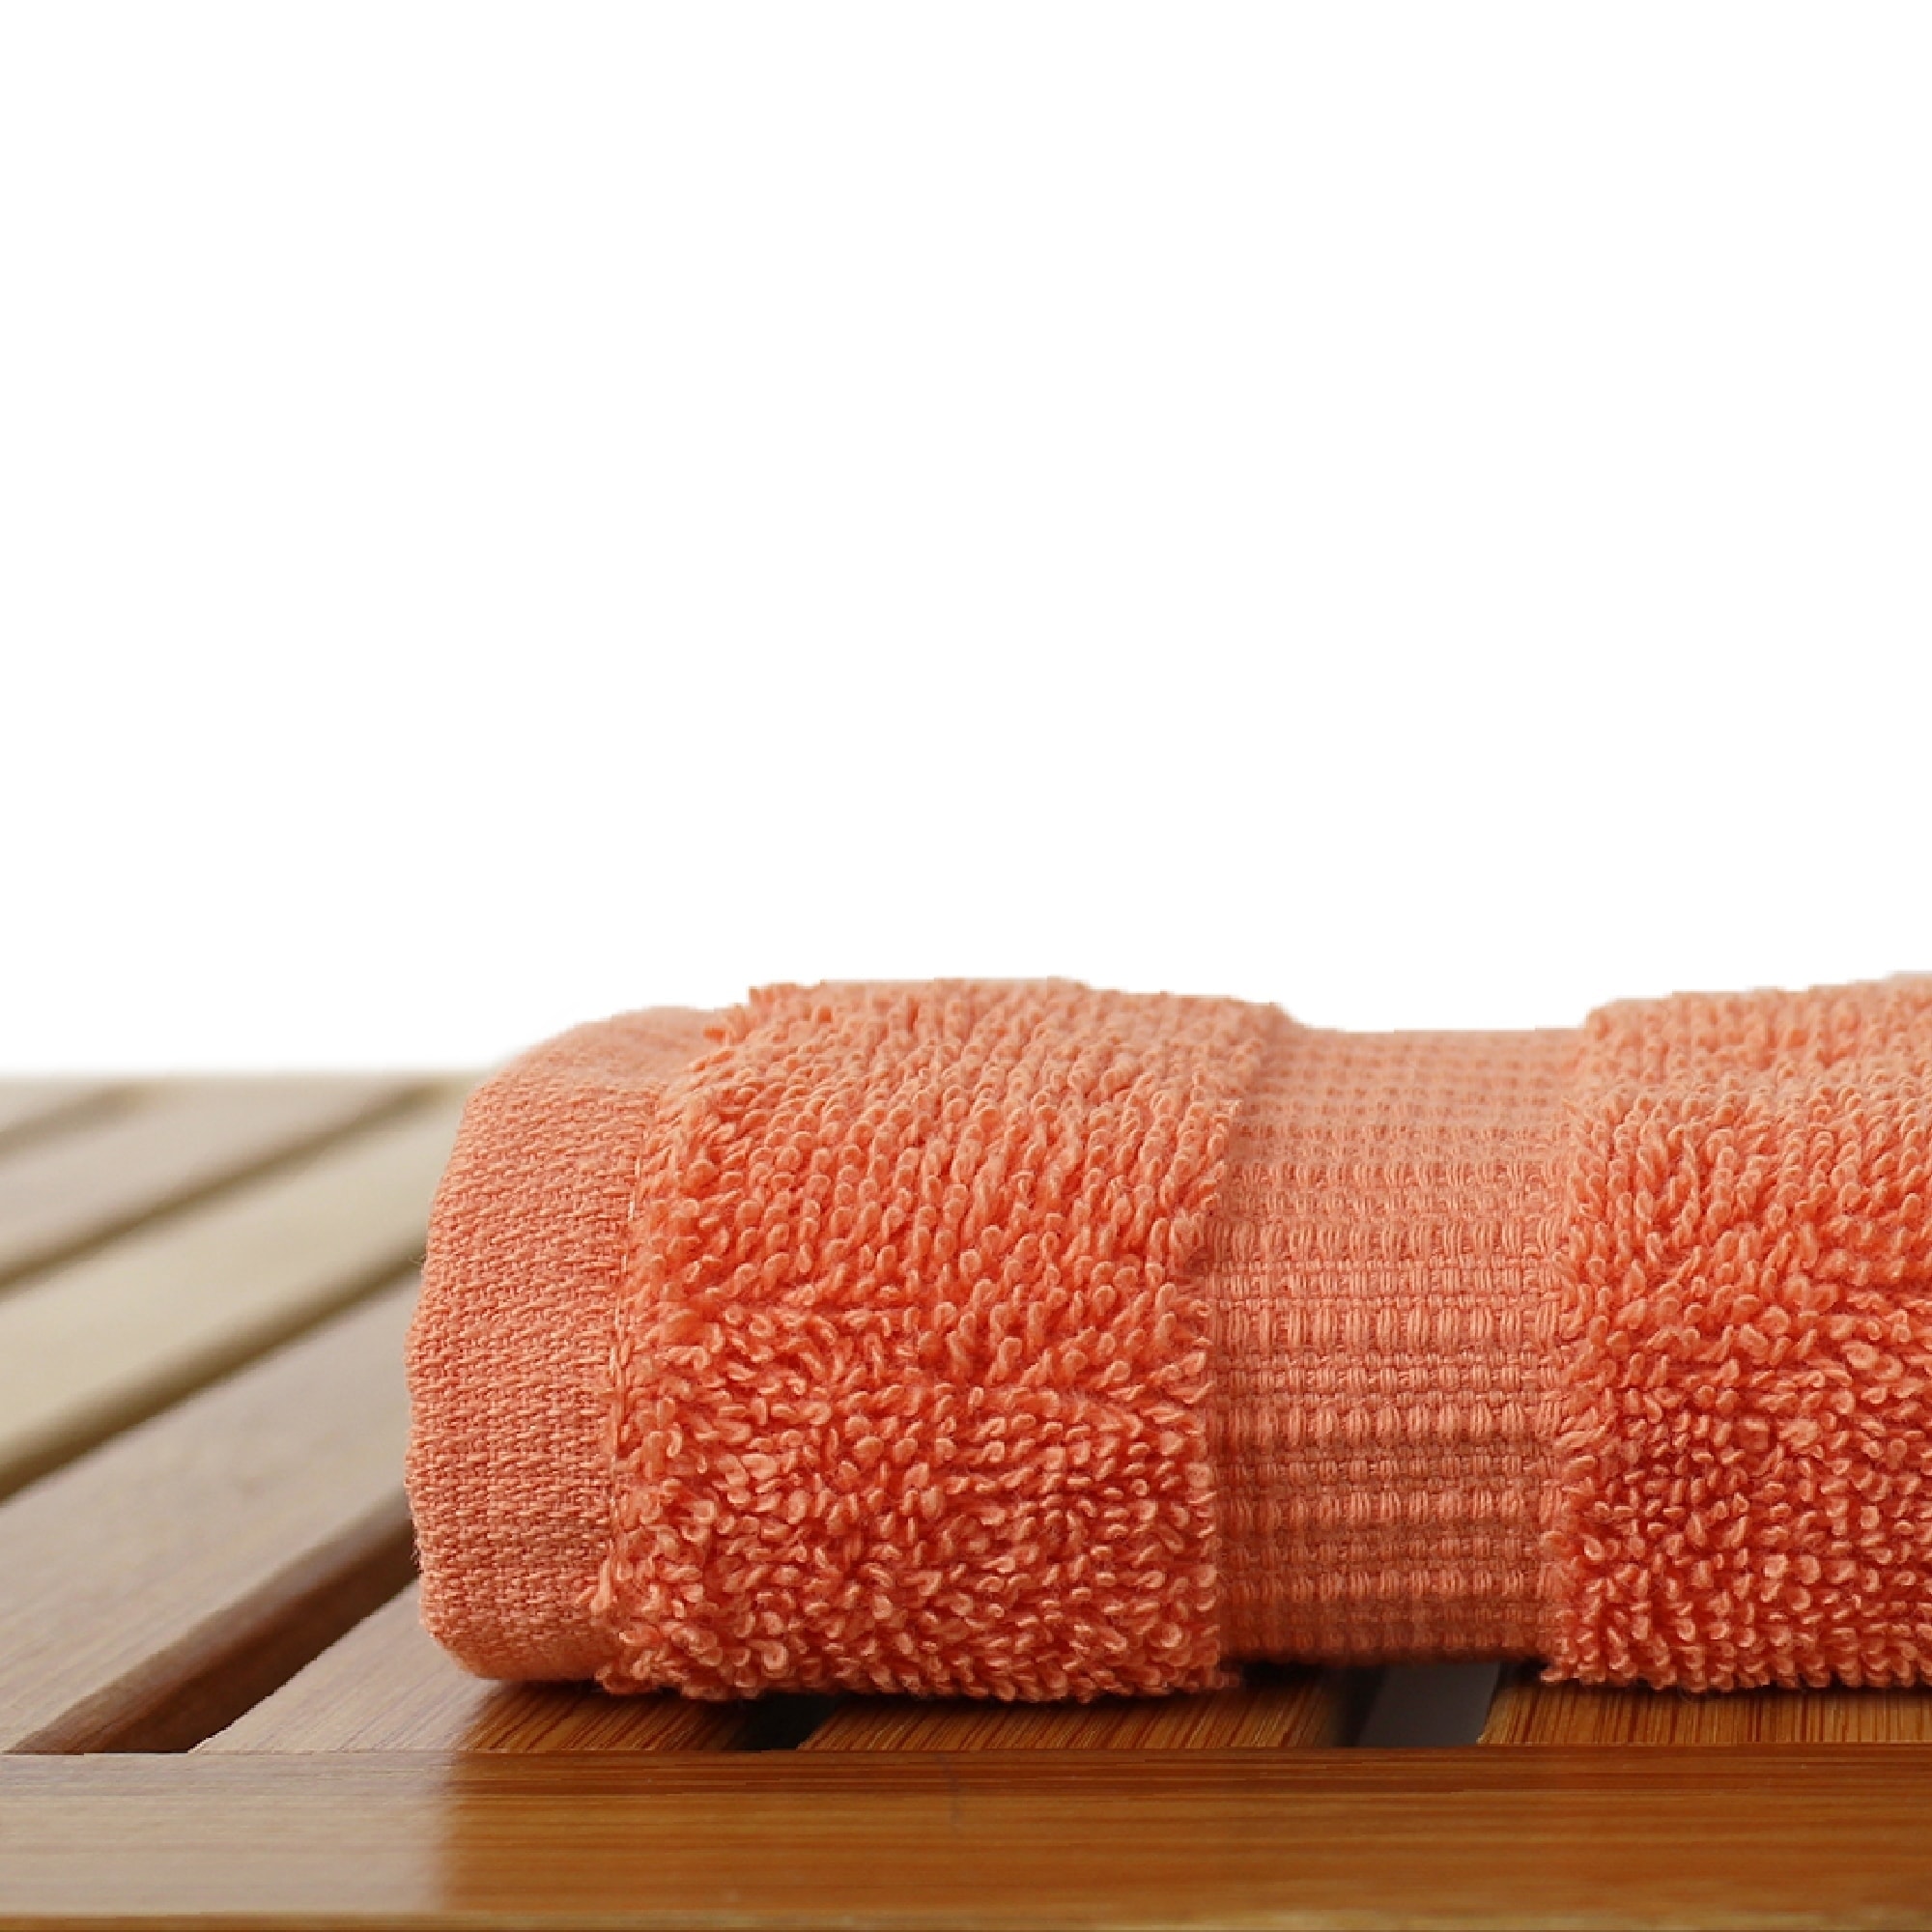 Bare Cotton 13x13-inch Washcloths (Set of 6) Coral